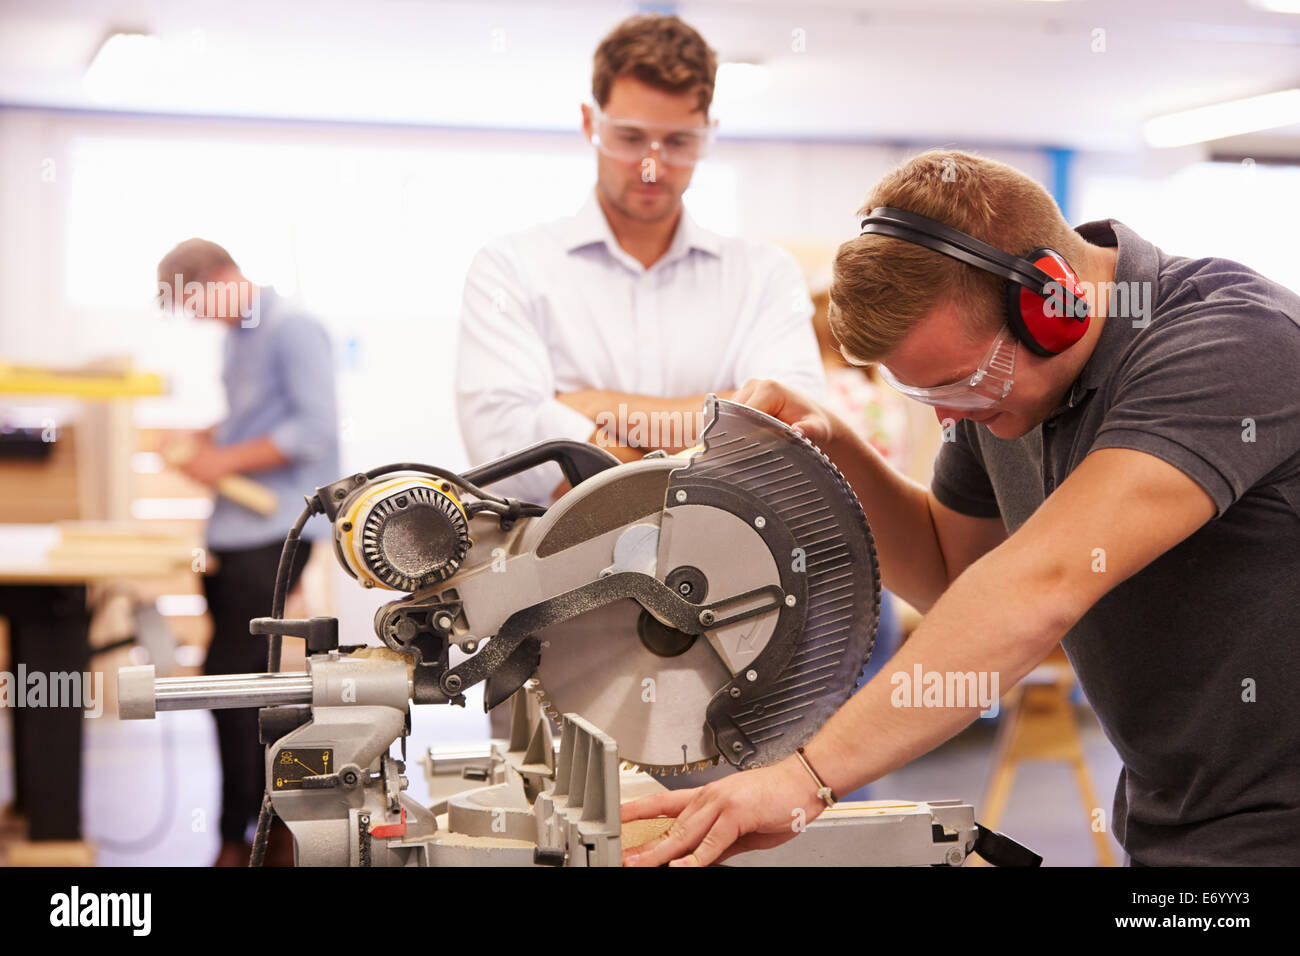 Student And Teacher In Carpentry Class Using Circular Saw Stock Photo